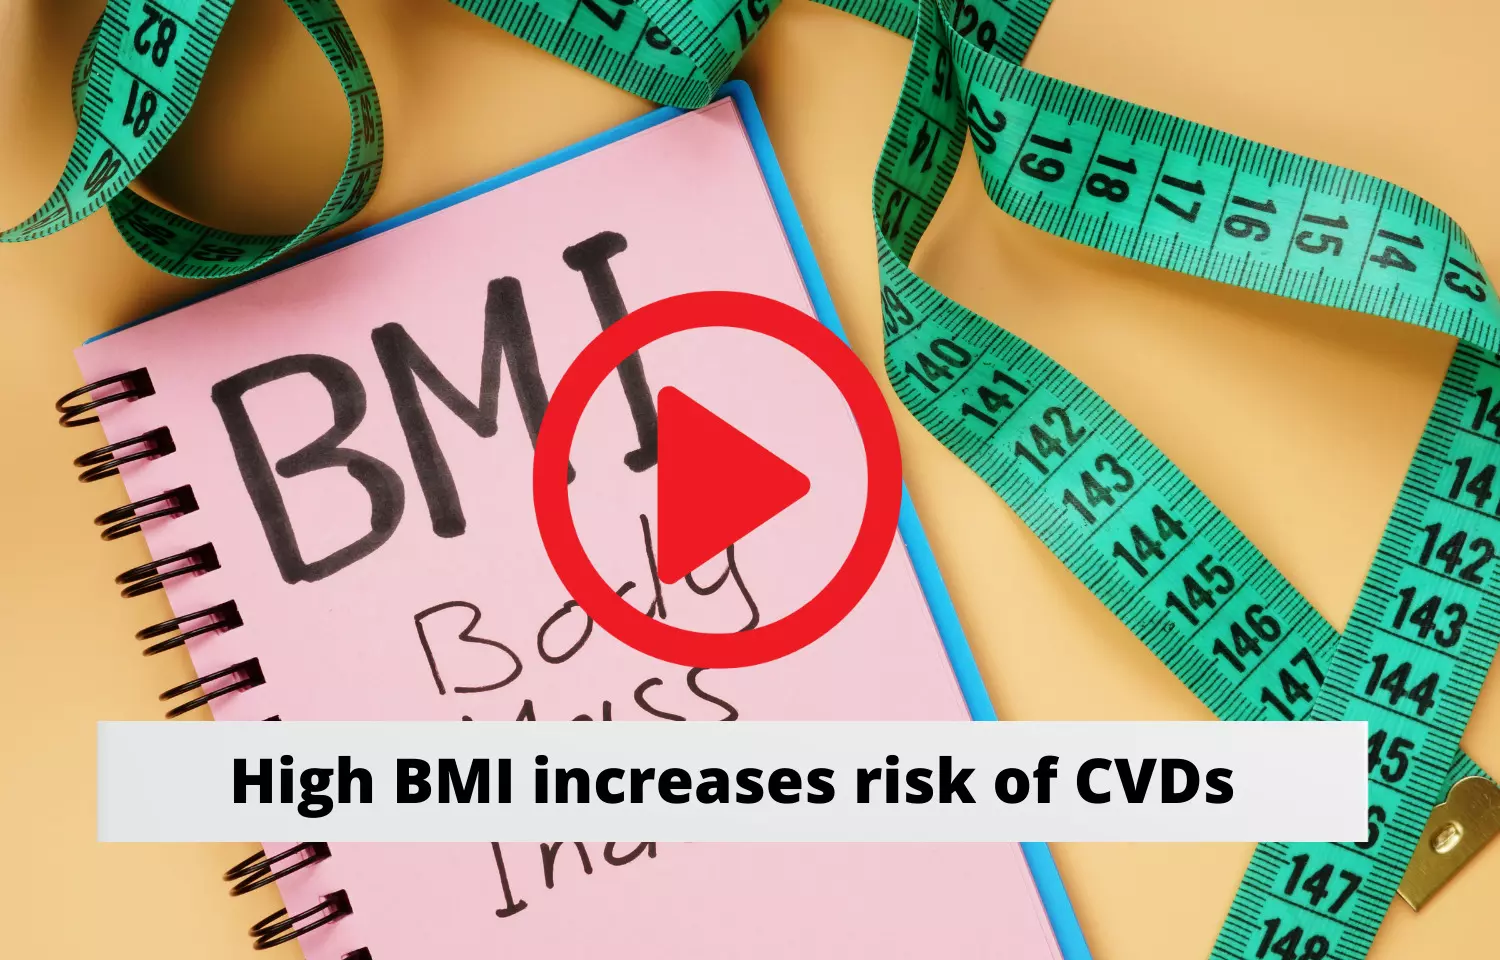 High BMI increases risk of CVDs